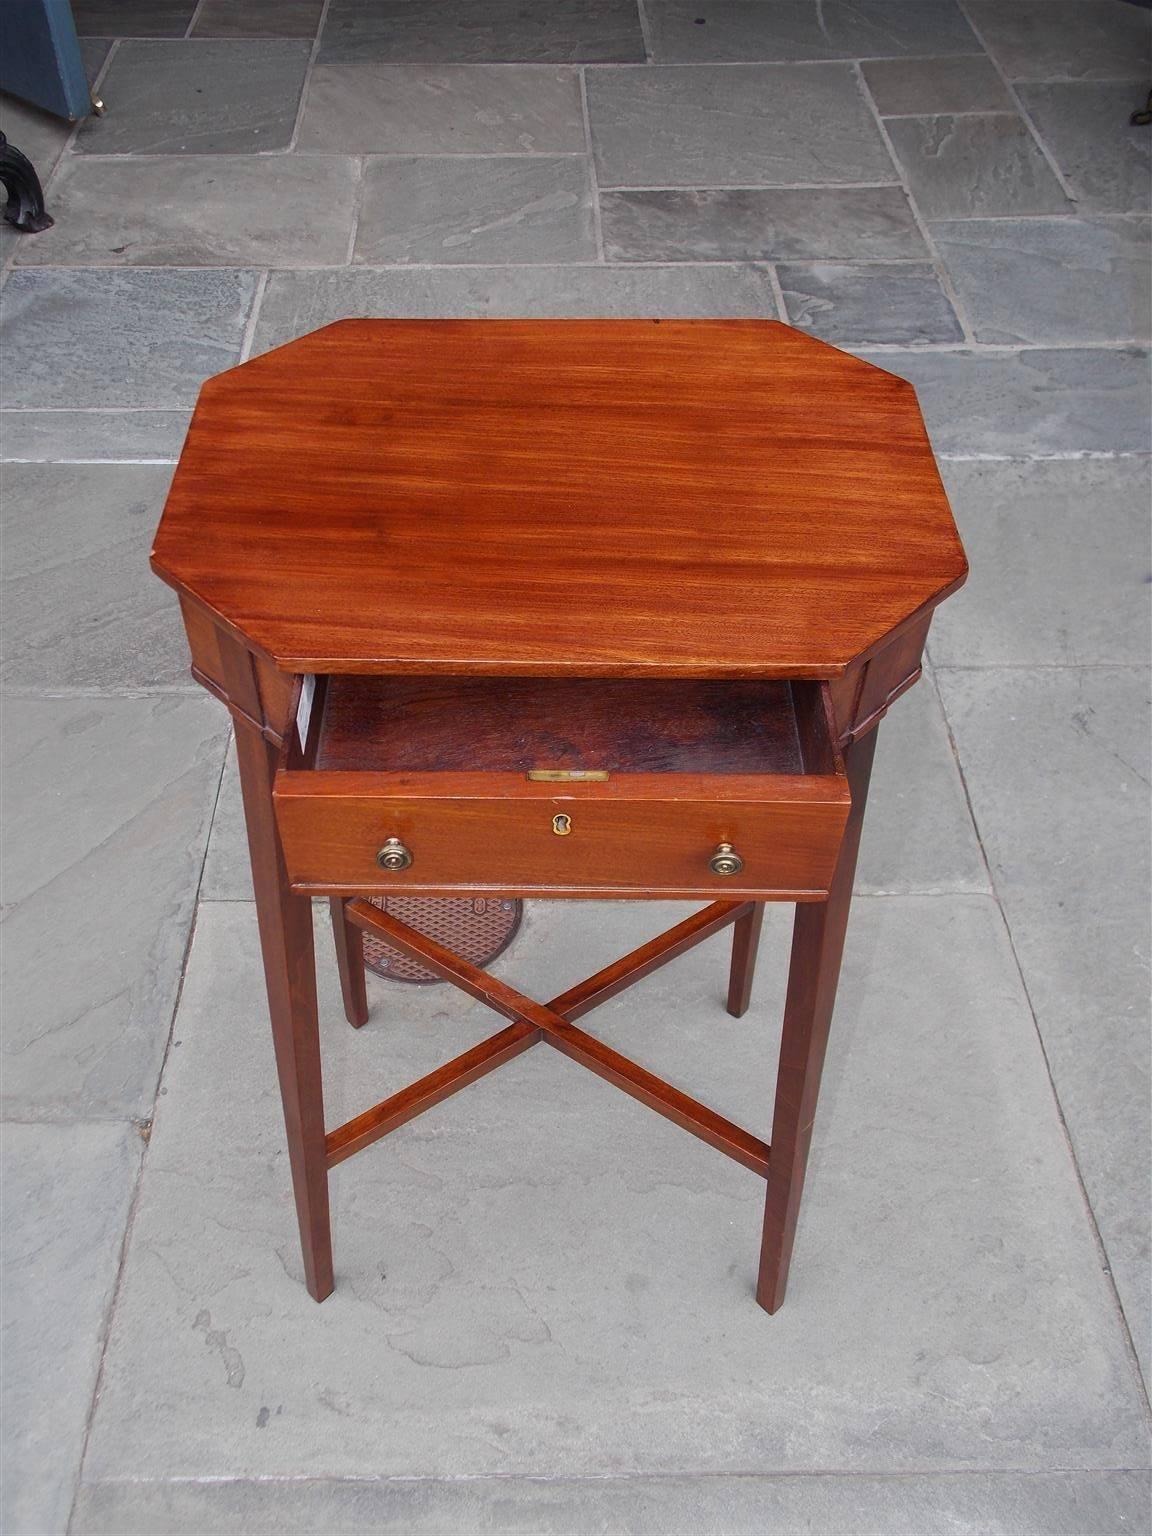 English Hepplewhite mahogany one drawer side table with an octagon carved top, original brass pulls and escutcheon, terminating on tapered squared legs with the original connecting stretchers, Early 19th century. Table is finished on all sides.